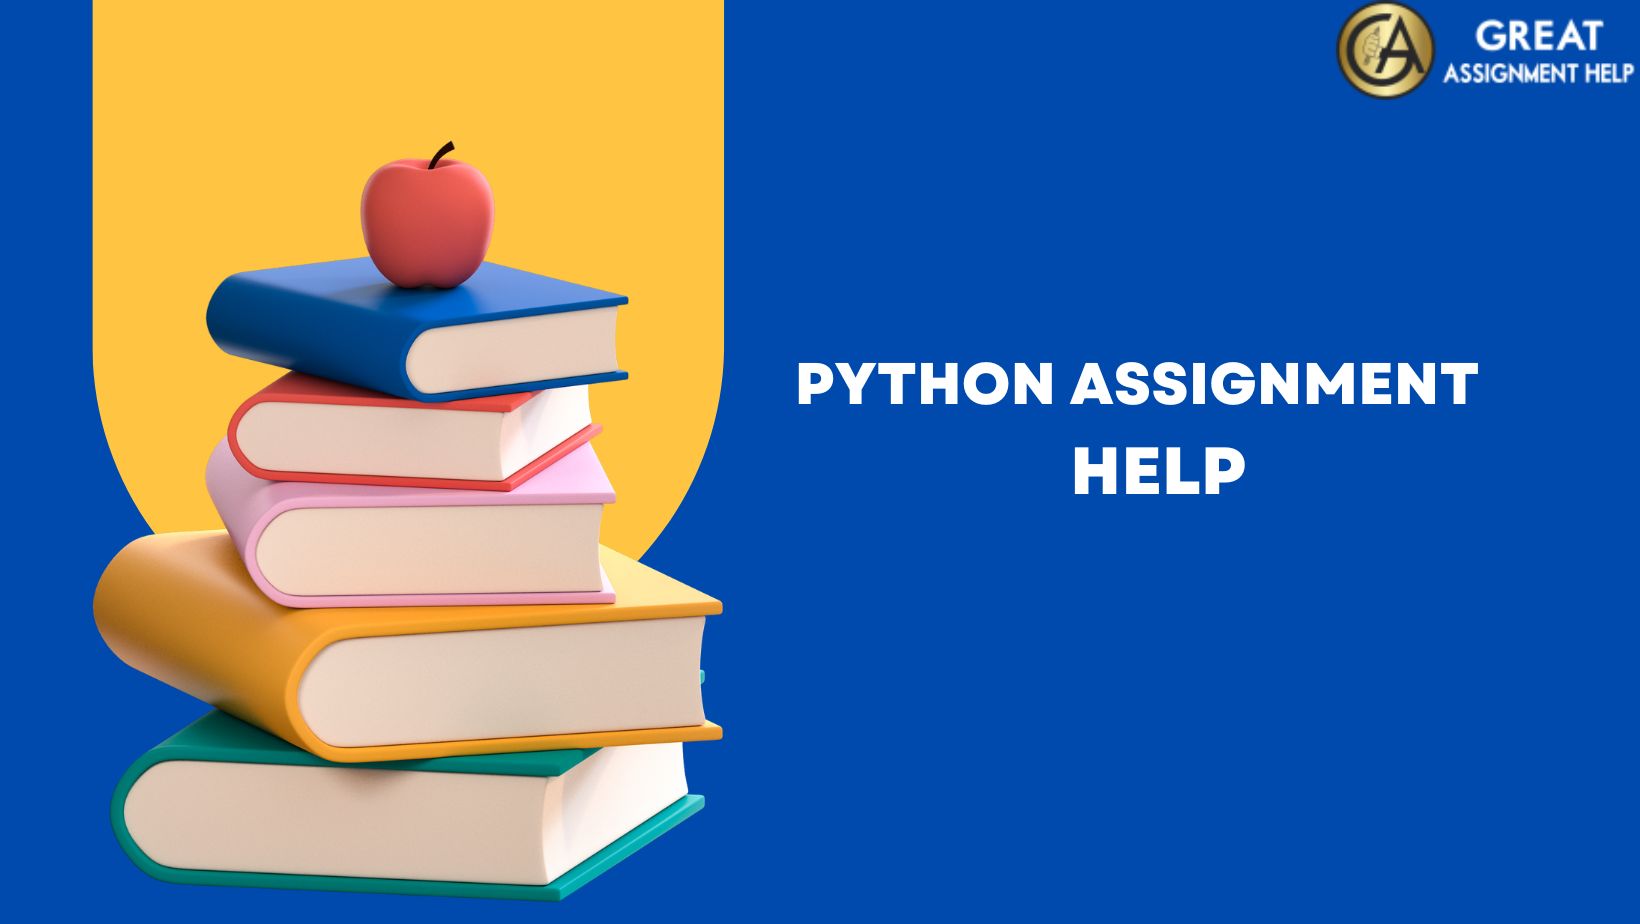 Python assignment help by highly skilled experts 